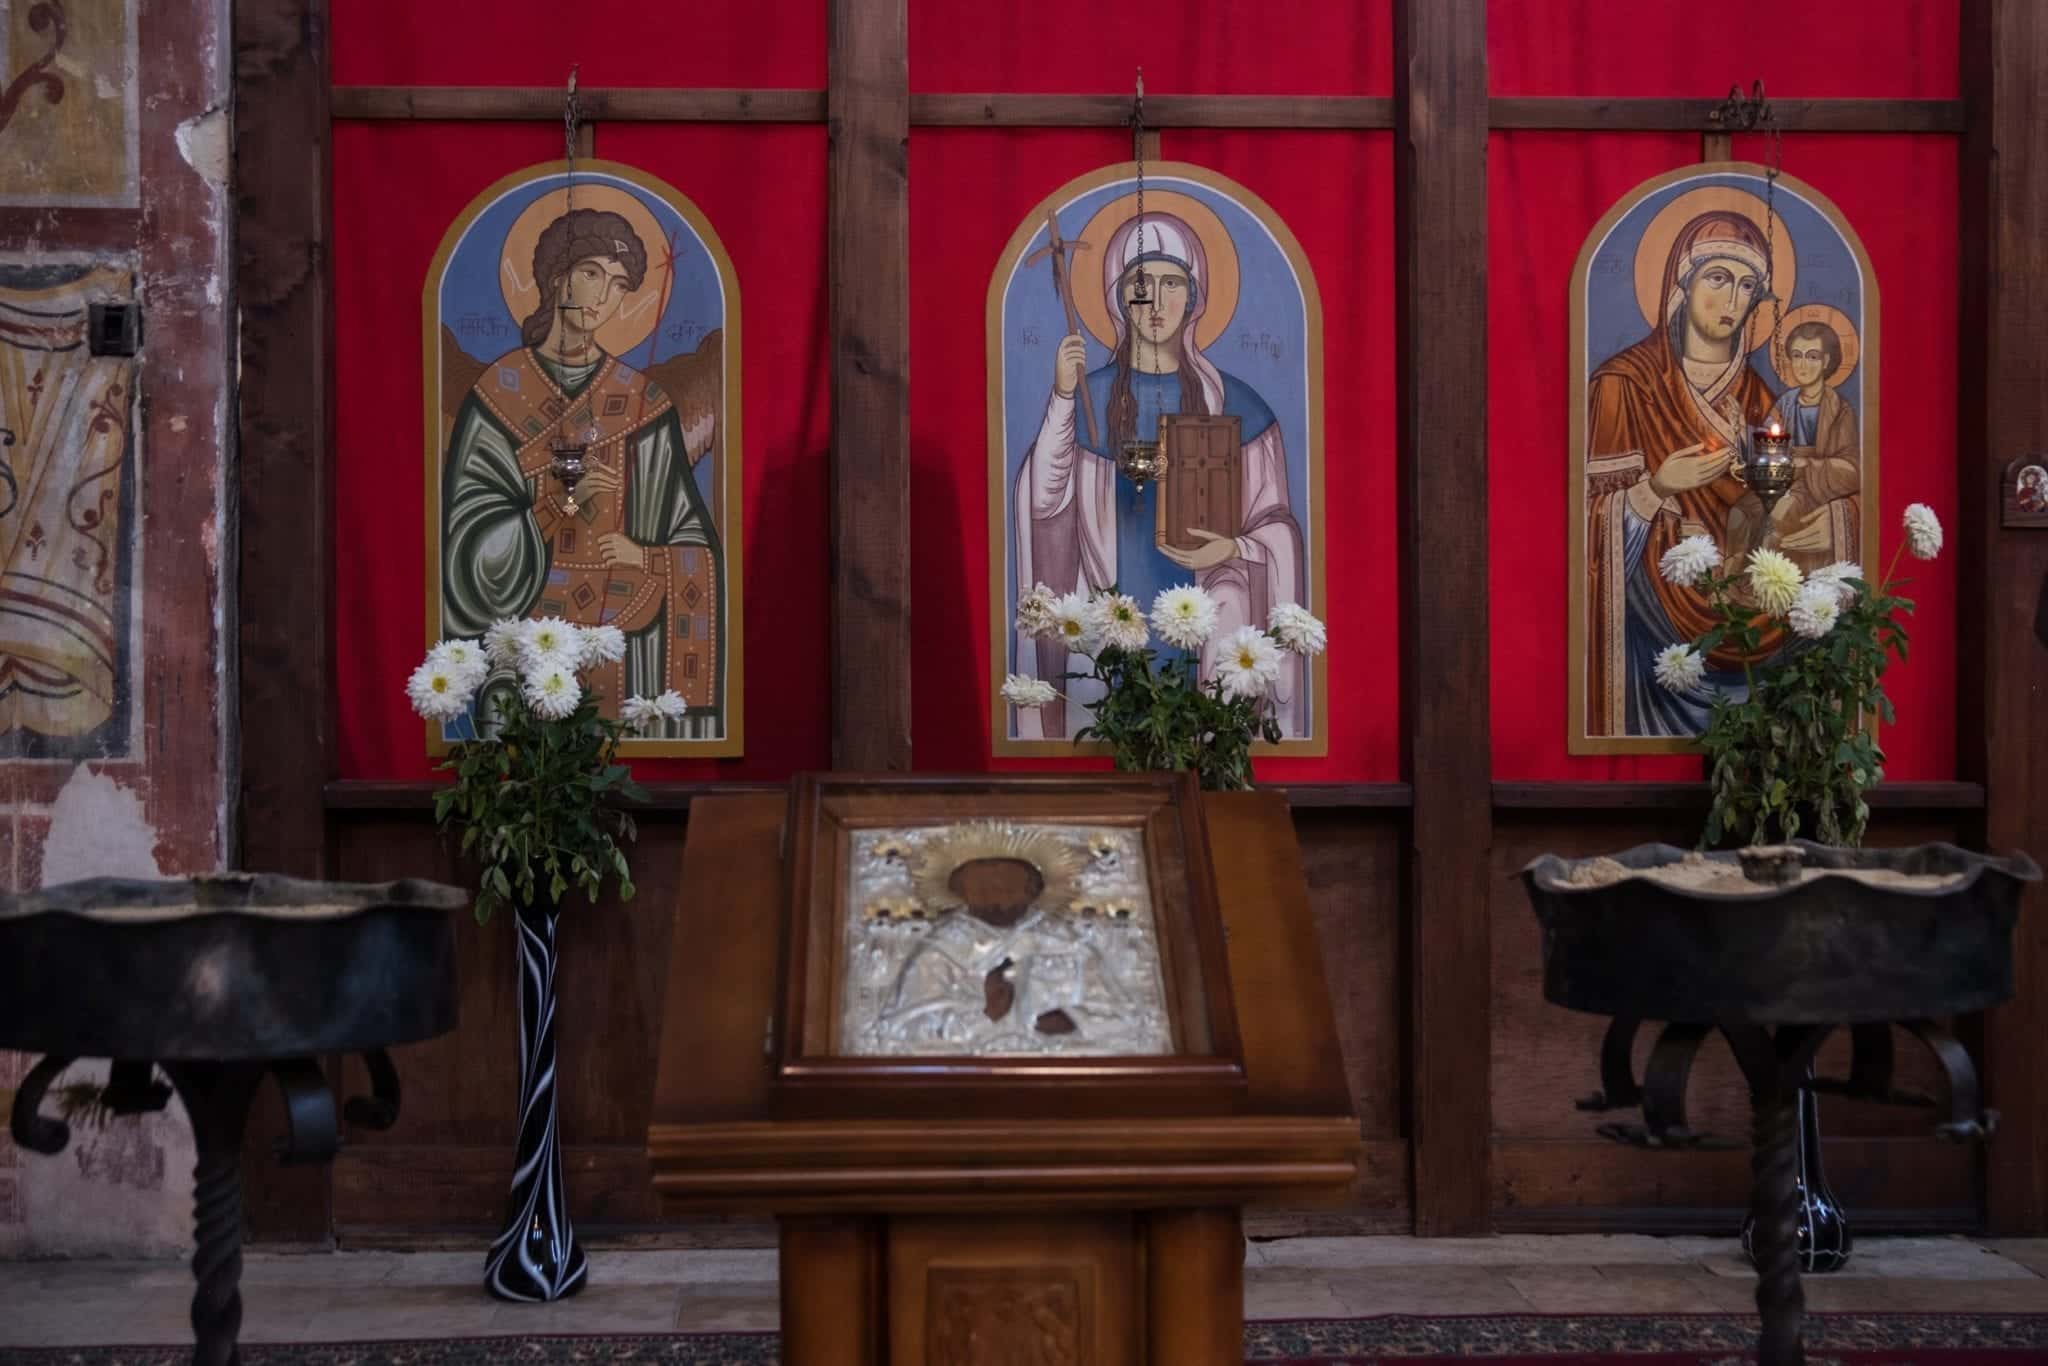 The altar at Gelati Monastery, with pictures of saints in front of blood-colored paneling.